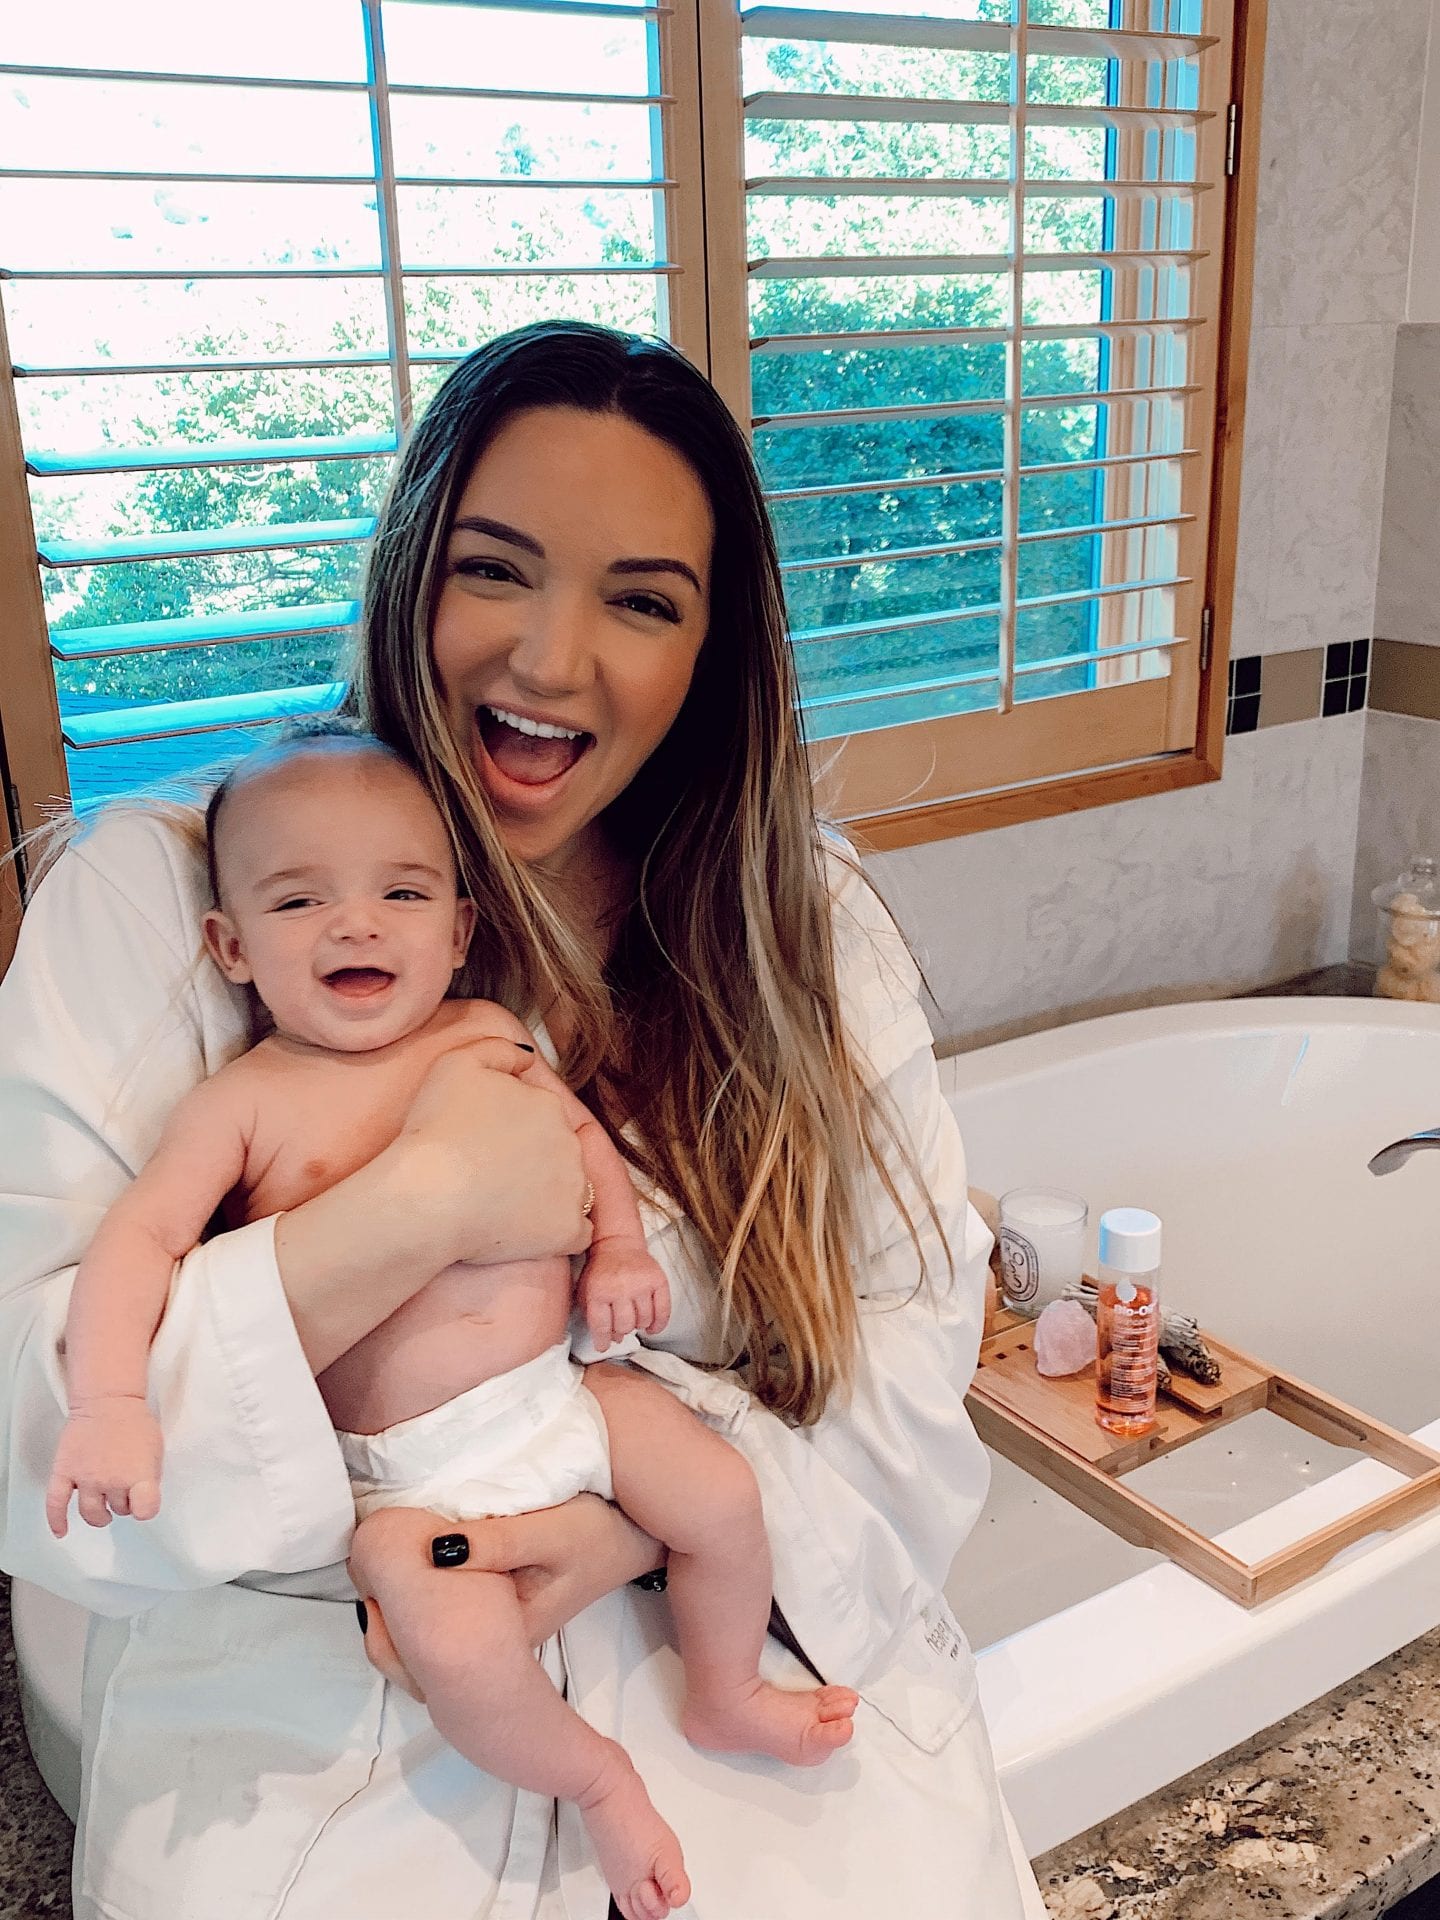 Bio Oil for Stretch Marks by popular San Francisco lifestyle blog, Just Add Glam: image of a mom wearing a white bathrobe and sitting on the edge of her tub while holding her baby.  